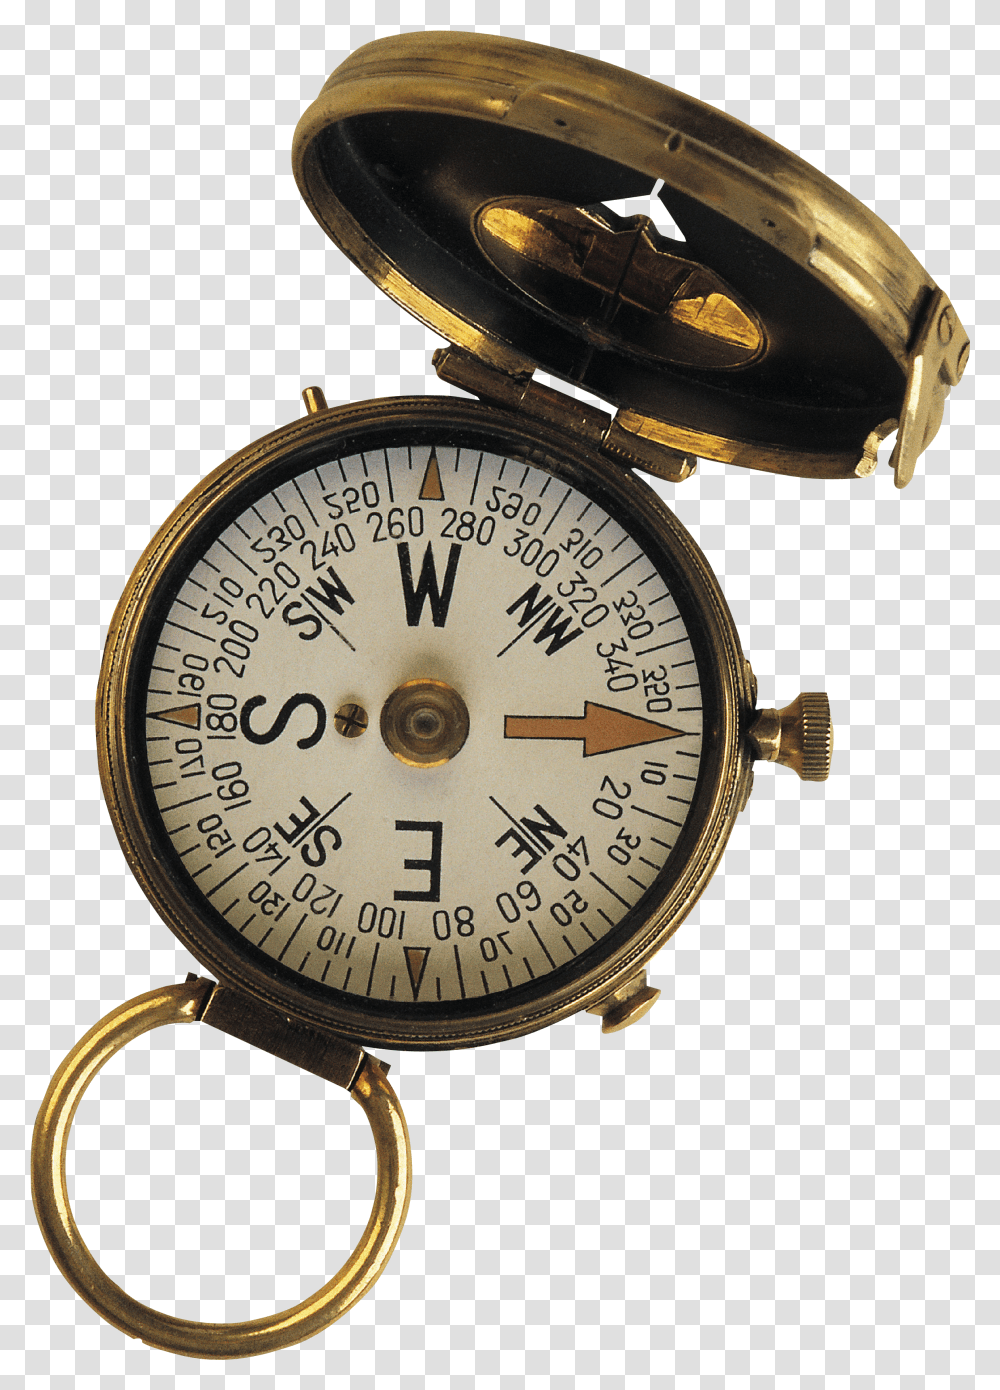 Compass Images Free Download Clear Background Compass Transparent Png